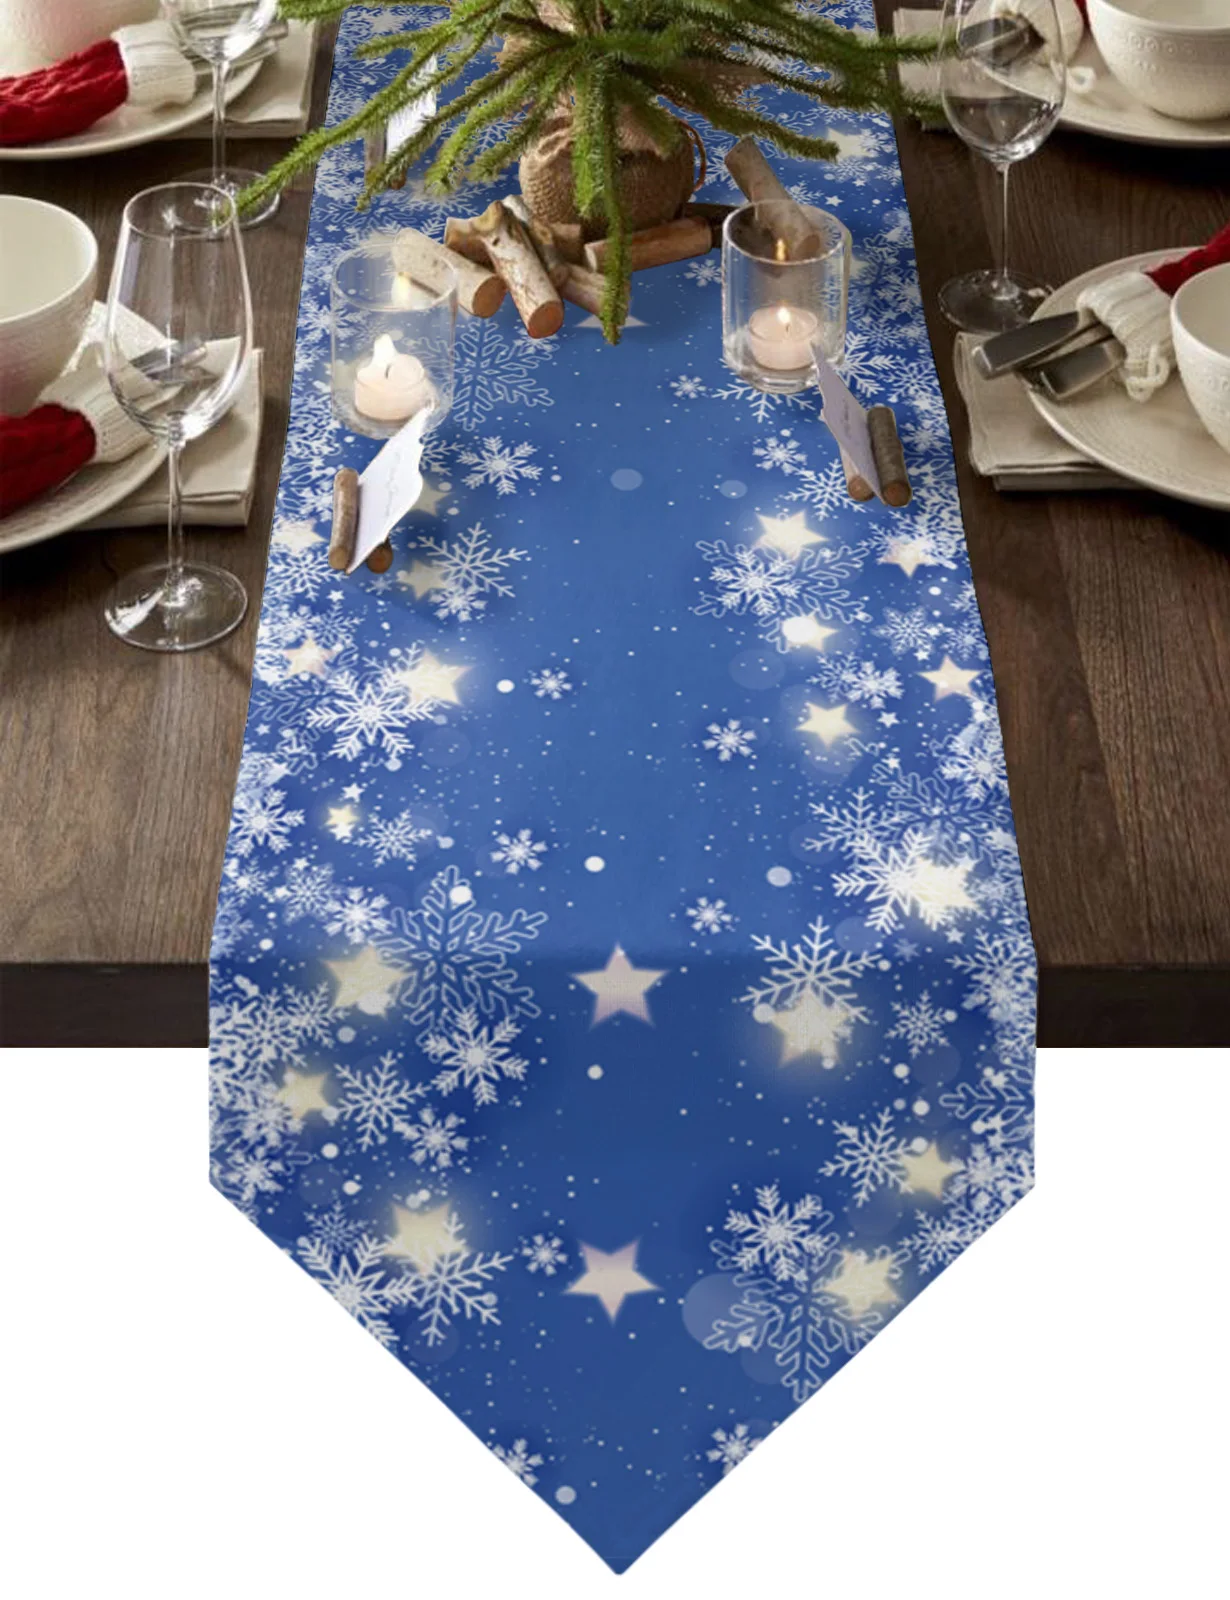 

Christmas Snowflake Blue Background Table Runner Placemat Coaster Table Desktop Christmas Decoration For Home New Year's Gift